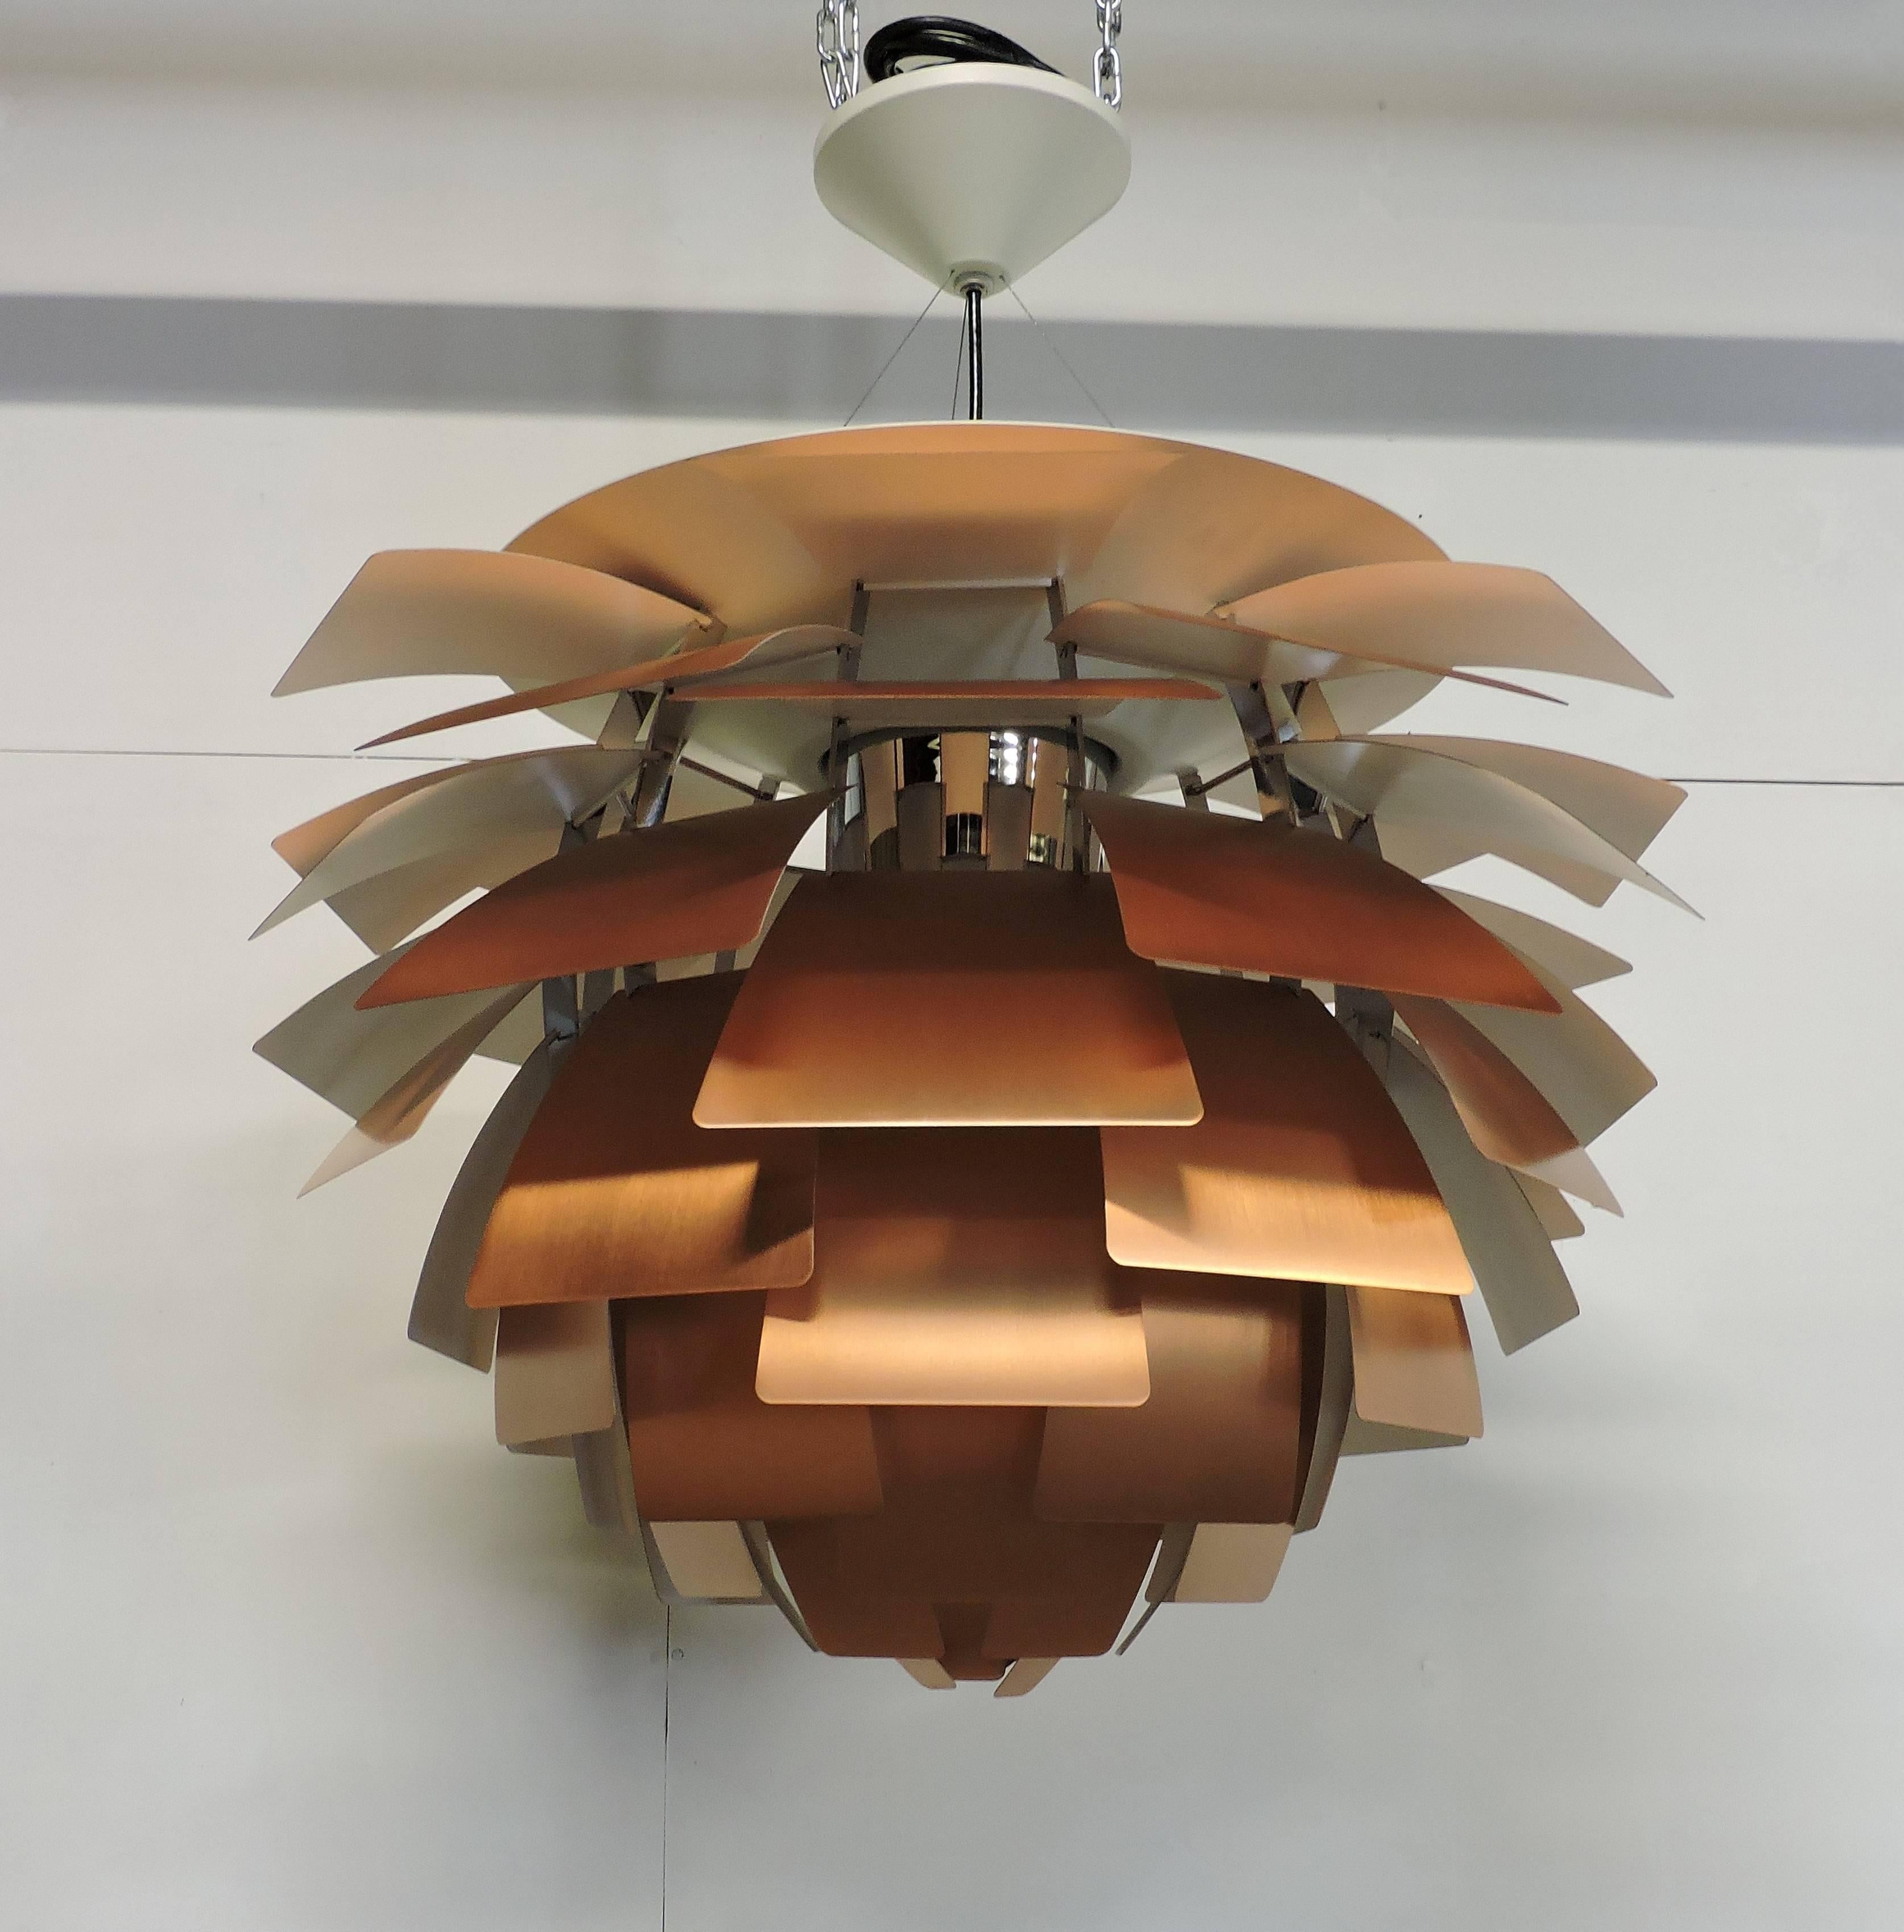 Beautiful PH Artichoke pendant light designed by Poul Henningsen and made in Denmark by Louis Poulsen. This light has copper shades, and at 33 inches diameter, is the largest size manufactured. It is fully labelled and can have a much longer drop